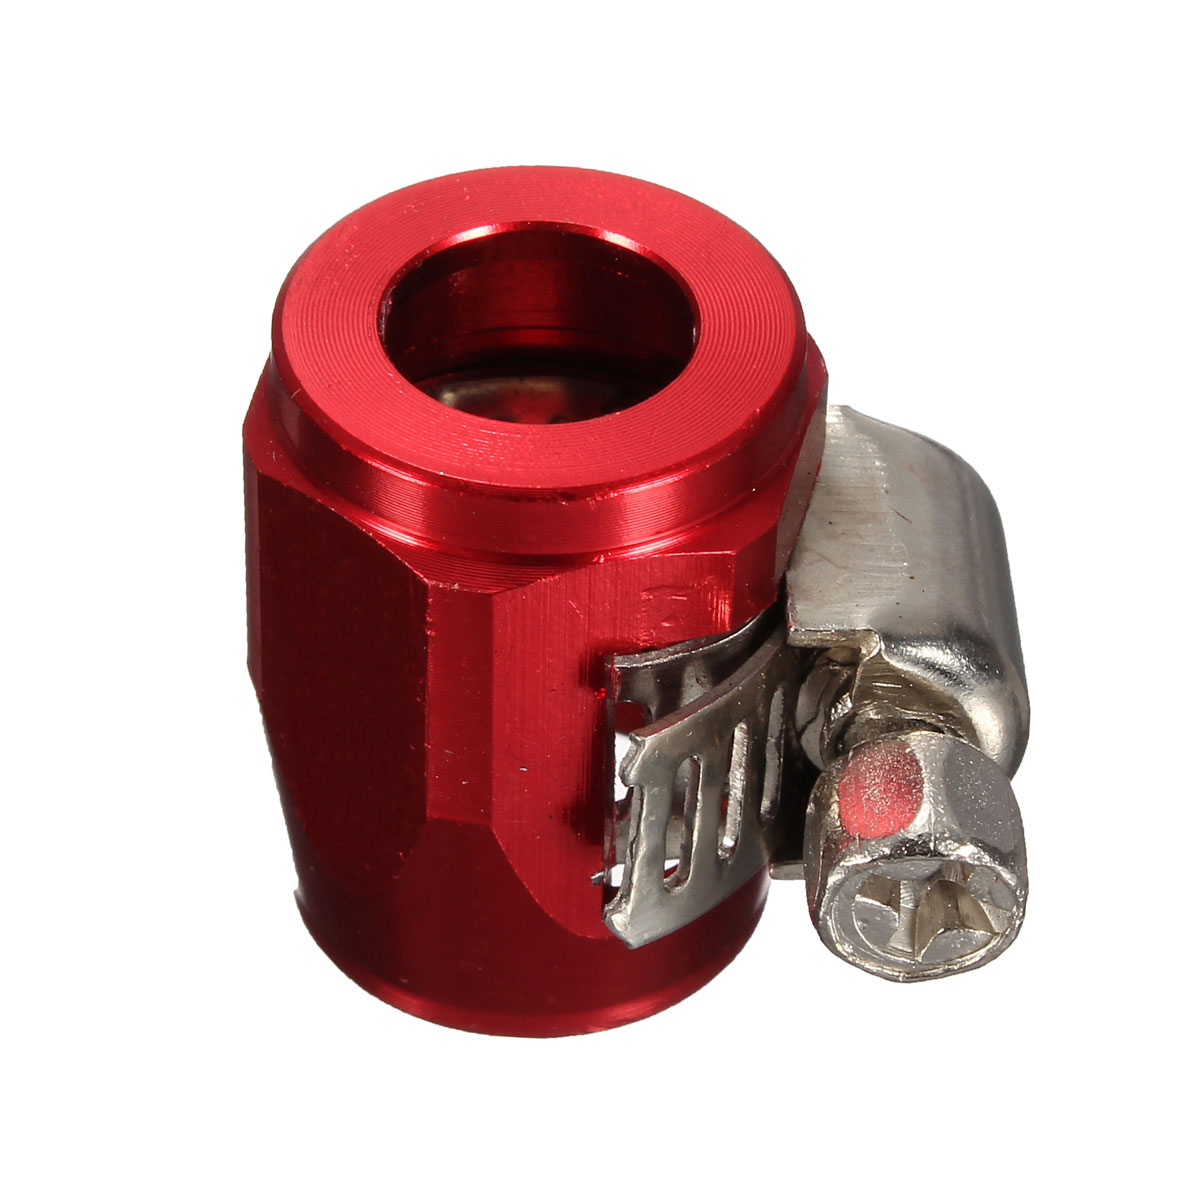 AN4-Hose-End-Finisher-Fuel-Oil-Water-Pipe-Jubilee-Clip-Clamp-1036488